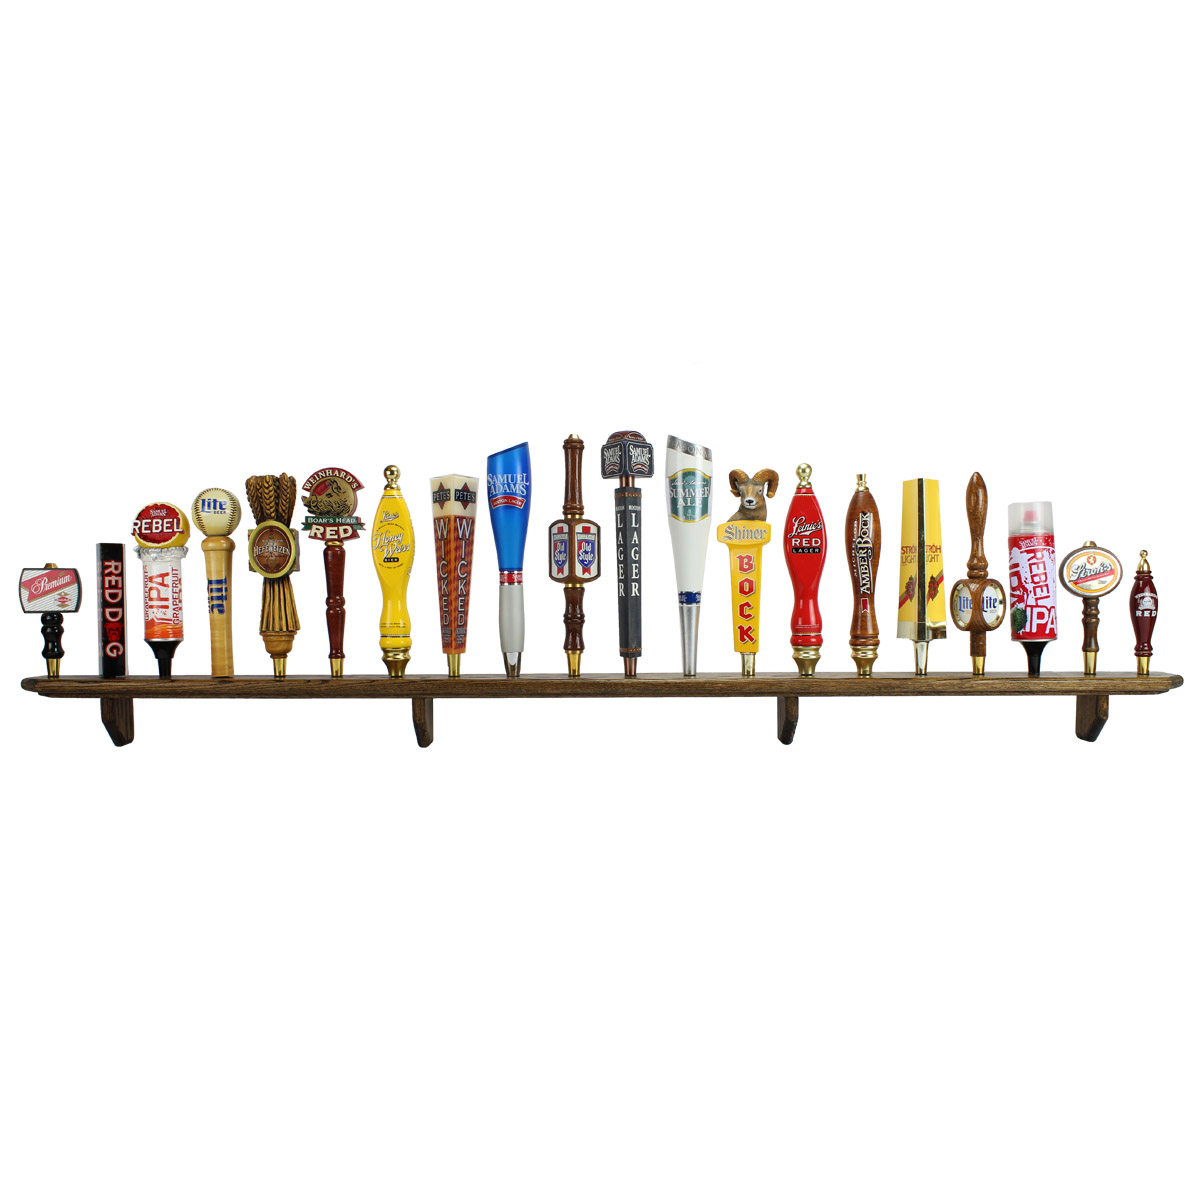 WALNUT FINISH BEER TAP HANDLE DISPLAY HOLDS 24 TAPS on 3 levels 